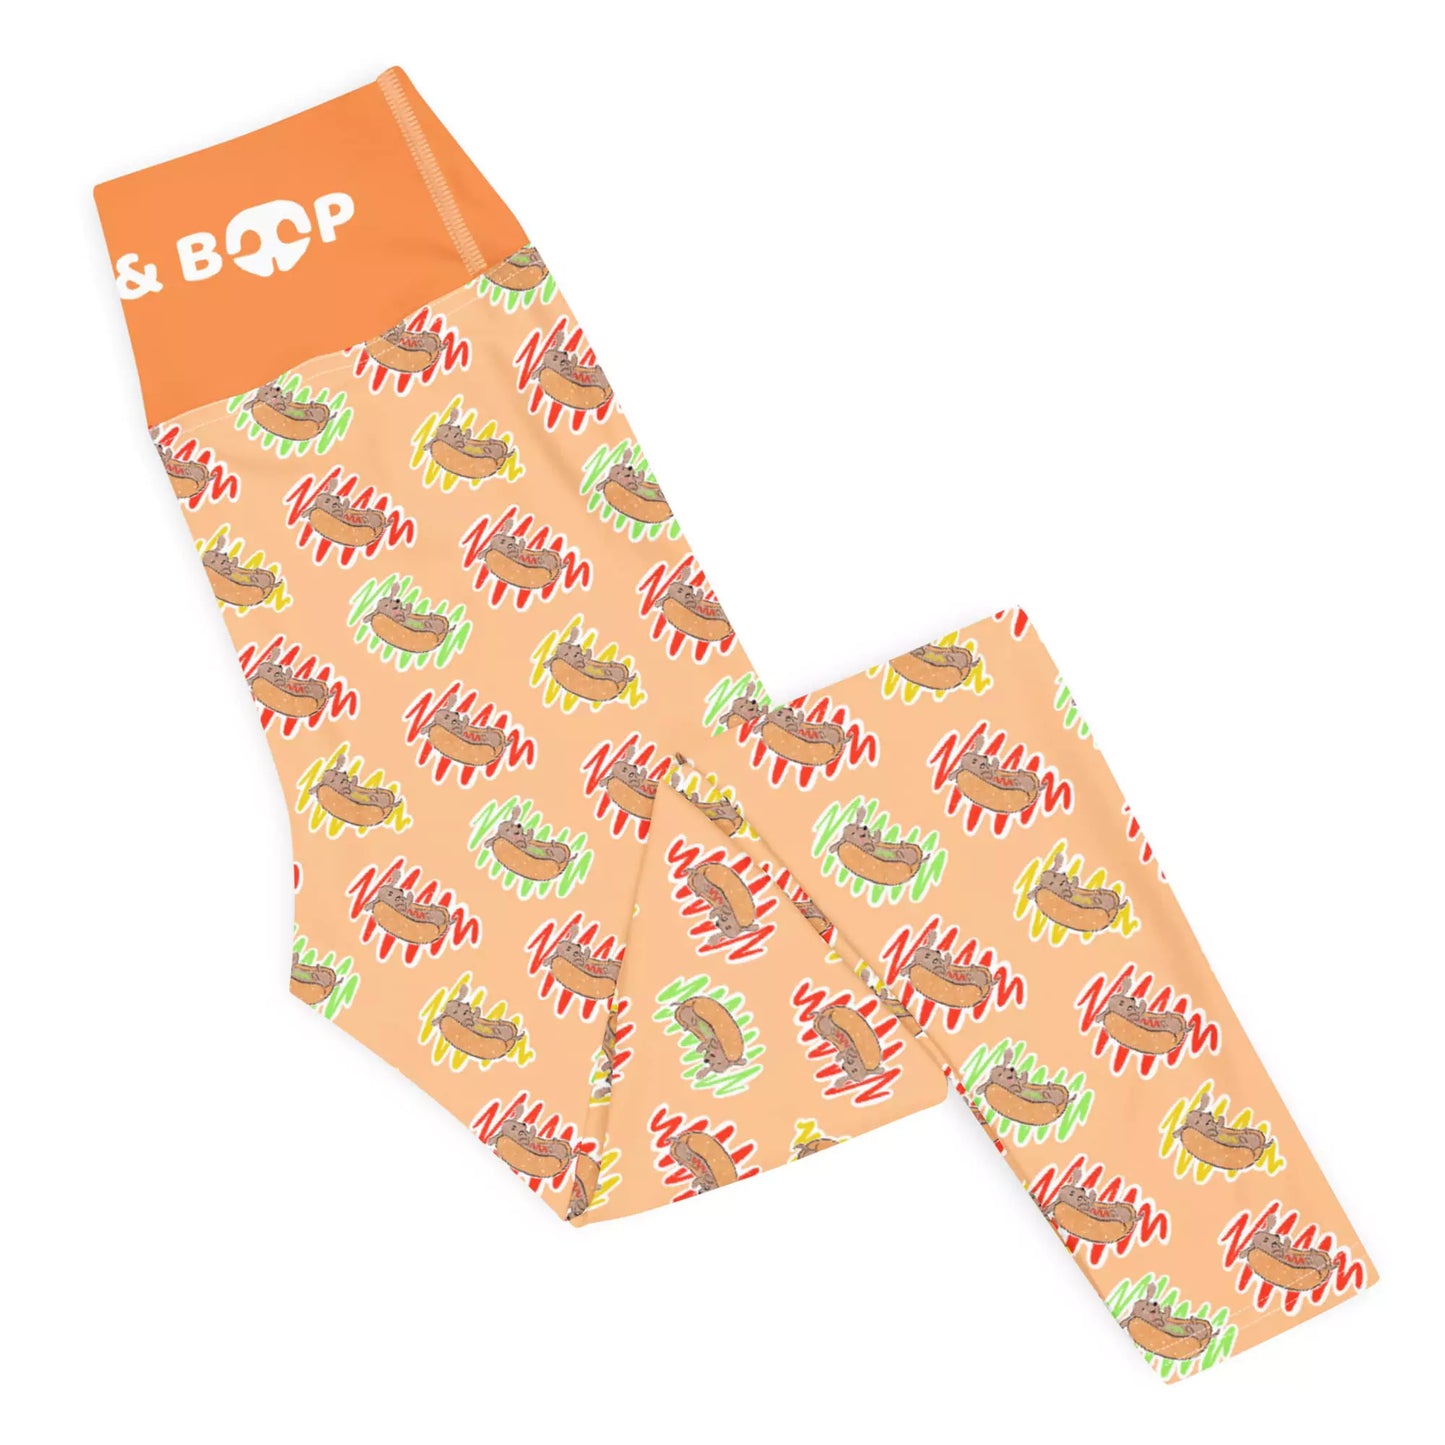 Shop Hot Dog Lover Workout Leggings for Dachshund Moms by Boogs & Boop.